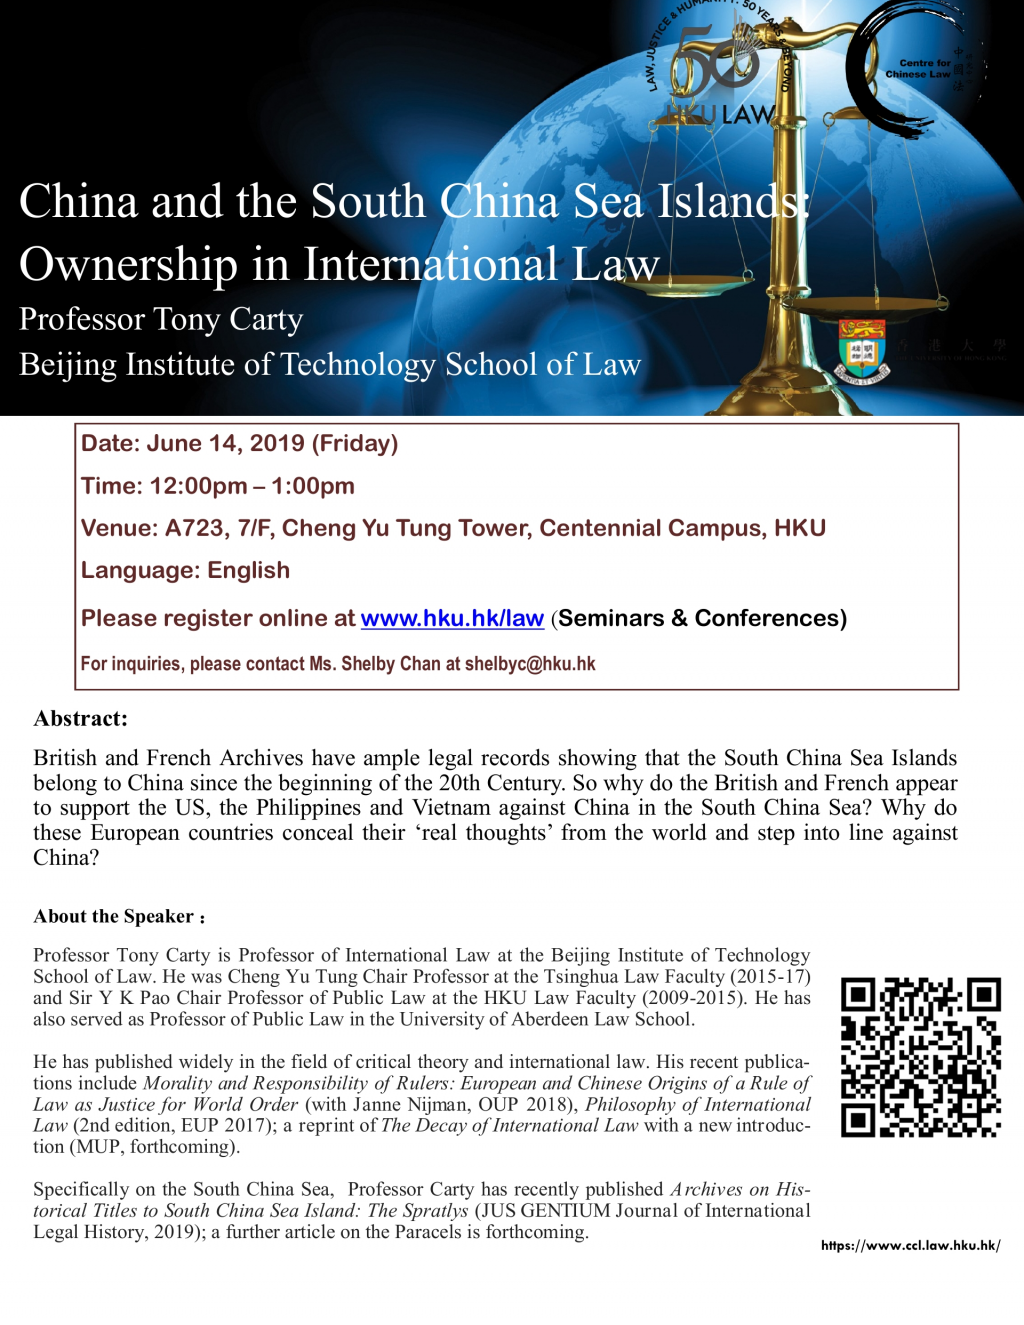 China and the South China Sea Islands: Ownership in International Law